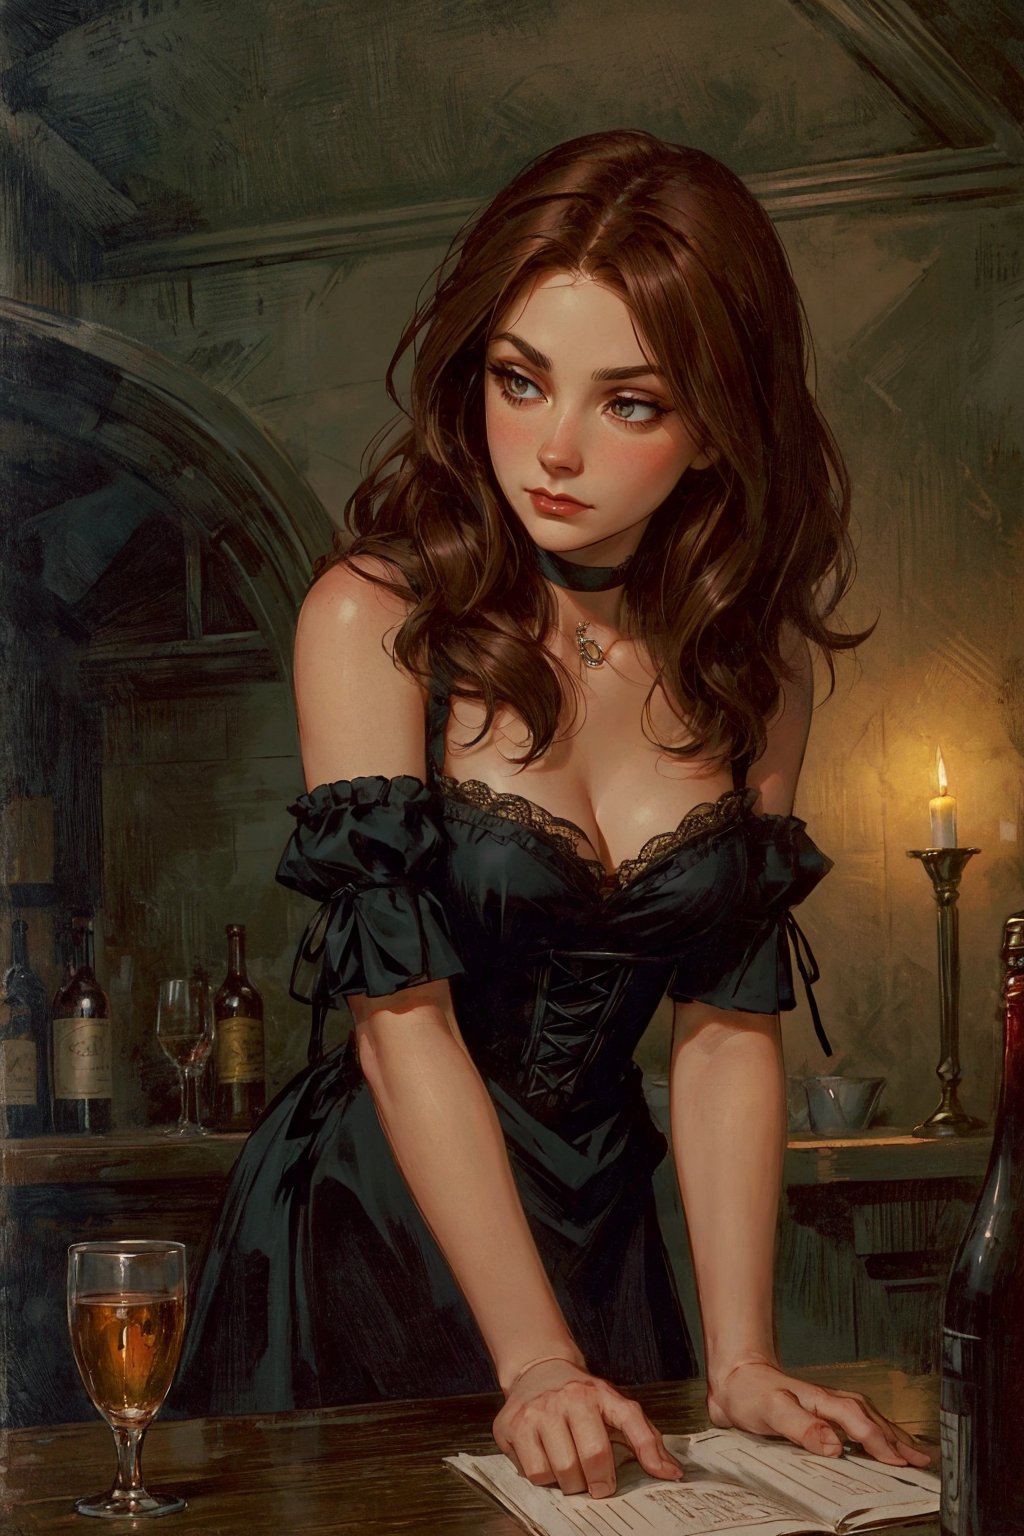 Generate art image (point-of-view:1.5) [masterpiece] that depicts a [fantasy] scene, in [frank frazetta] [80's] [comics style]. A young woman with a slim figure and auburn hair stands in an old Victorian pub. She wears a knee-length, high-necked [burgundy Victorian dress] with [puffed sleeves], adorned with [lace trimmings]. The dress is cinched at the waist with a [black corset], emphasizing her slender figure. Her hands are covered with [white lace gloves]. Around her neck, there is a [simple pearl choker]. Her face is [subtly blushed], with [detailed contours], [high cheekbones], and a [nose with a slight upturn at the tip]. She has [dark, alluring eyes] with [black eyeliner] and [smudged black eyeshadow], and her [full pouty lips] are [painted in a deep rouge]. Her auburn hair is styled in [loose waves], falling gracefully around her shoulders.In the dimly lit pub, she leans against a wooden table with a [worn surface], holding a [damp cloth] as she cleans the table. The flickering candlelight casts a warm glow on the scene, creating an atmosphere of historical charm. The background includes details like old wooden chairs, dimly lit sconces, and faded Victorian wallpaper, reinforcing the vintage setting.  <lora:bichu-v0612:0.5> <lora:detailed_eye-10:0.5>  <lora:Gloomifier_slider_LECO_500w:0.8> <lora:hairdetailer:0.8>